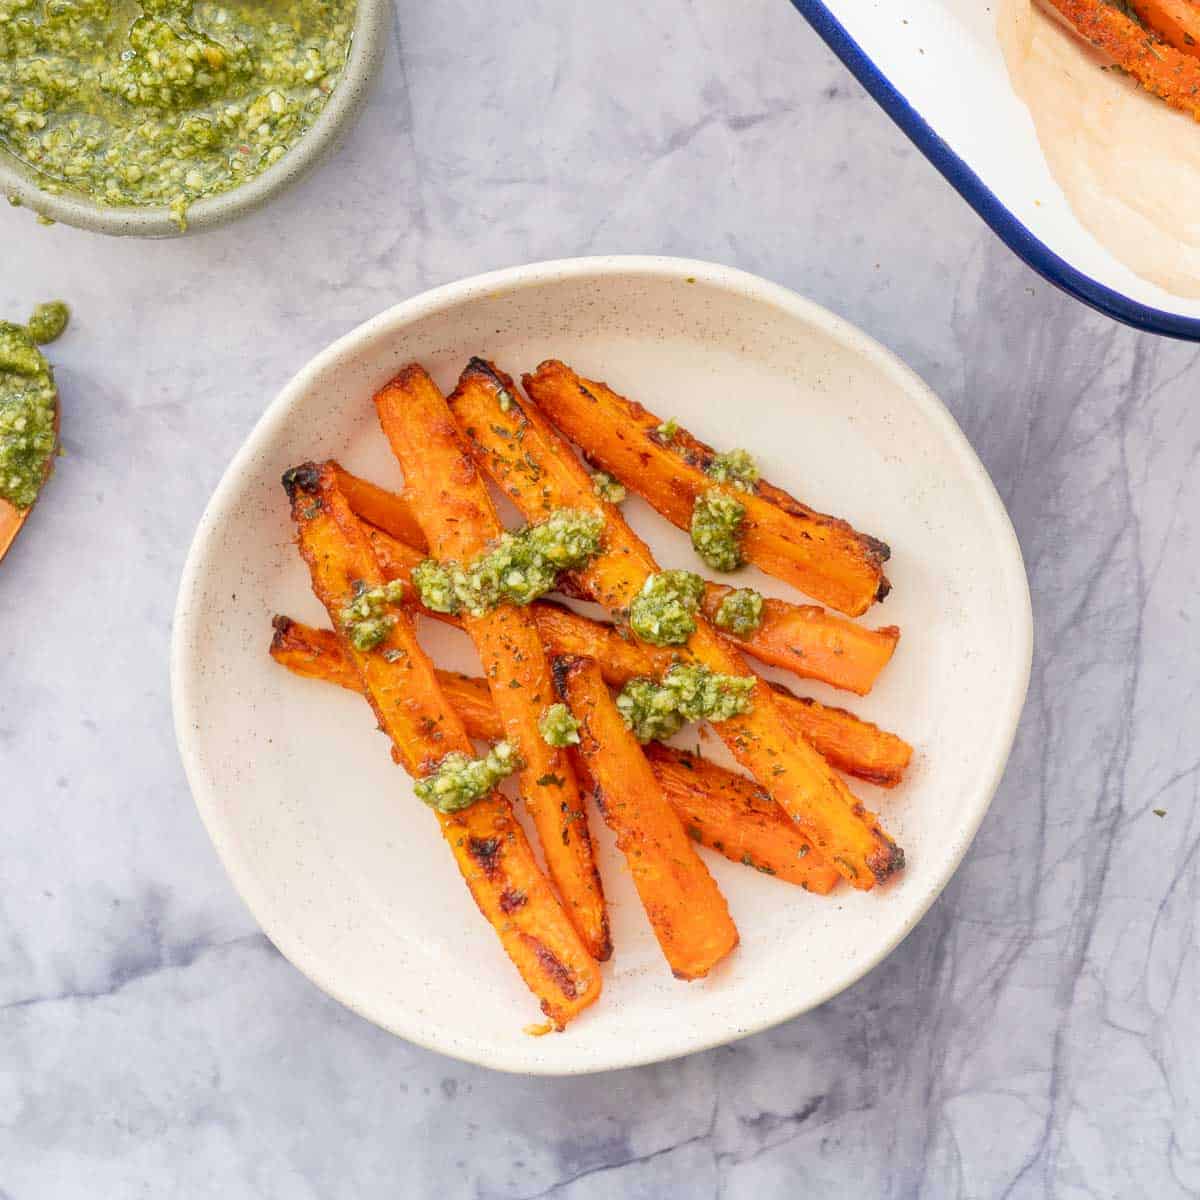 Carrot fries on a ceramic side plate drizzled with pesto sauce.